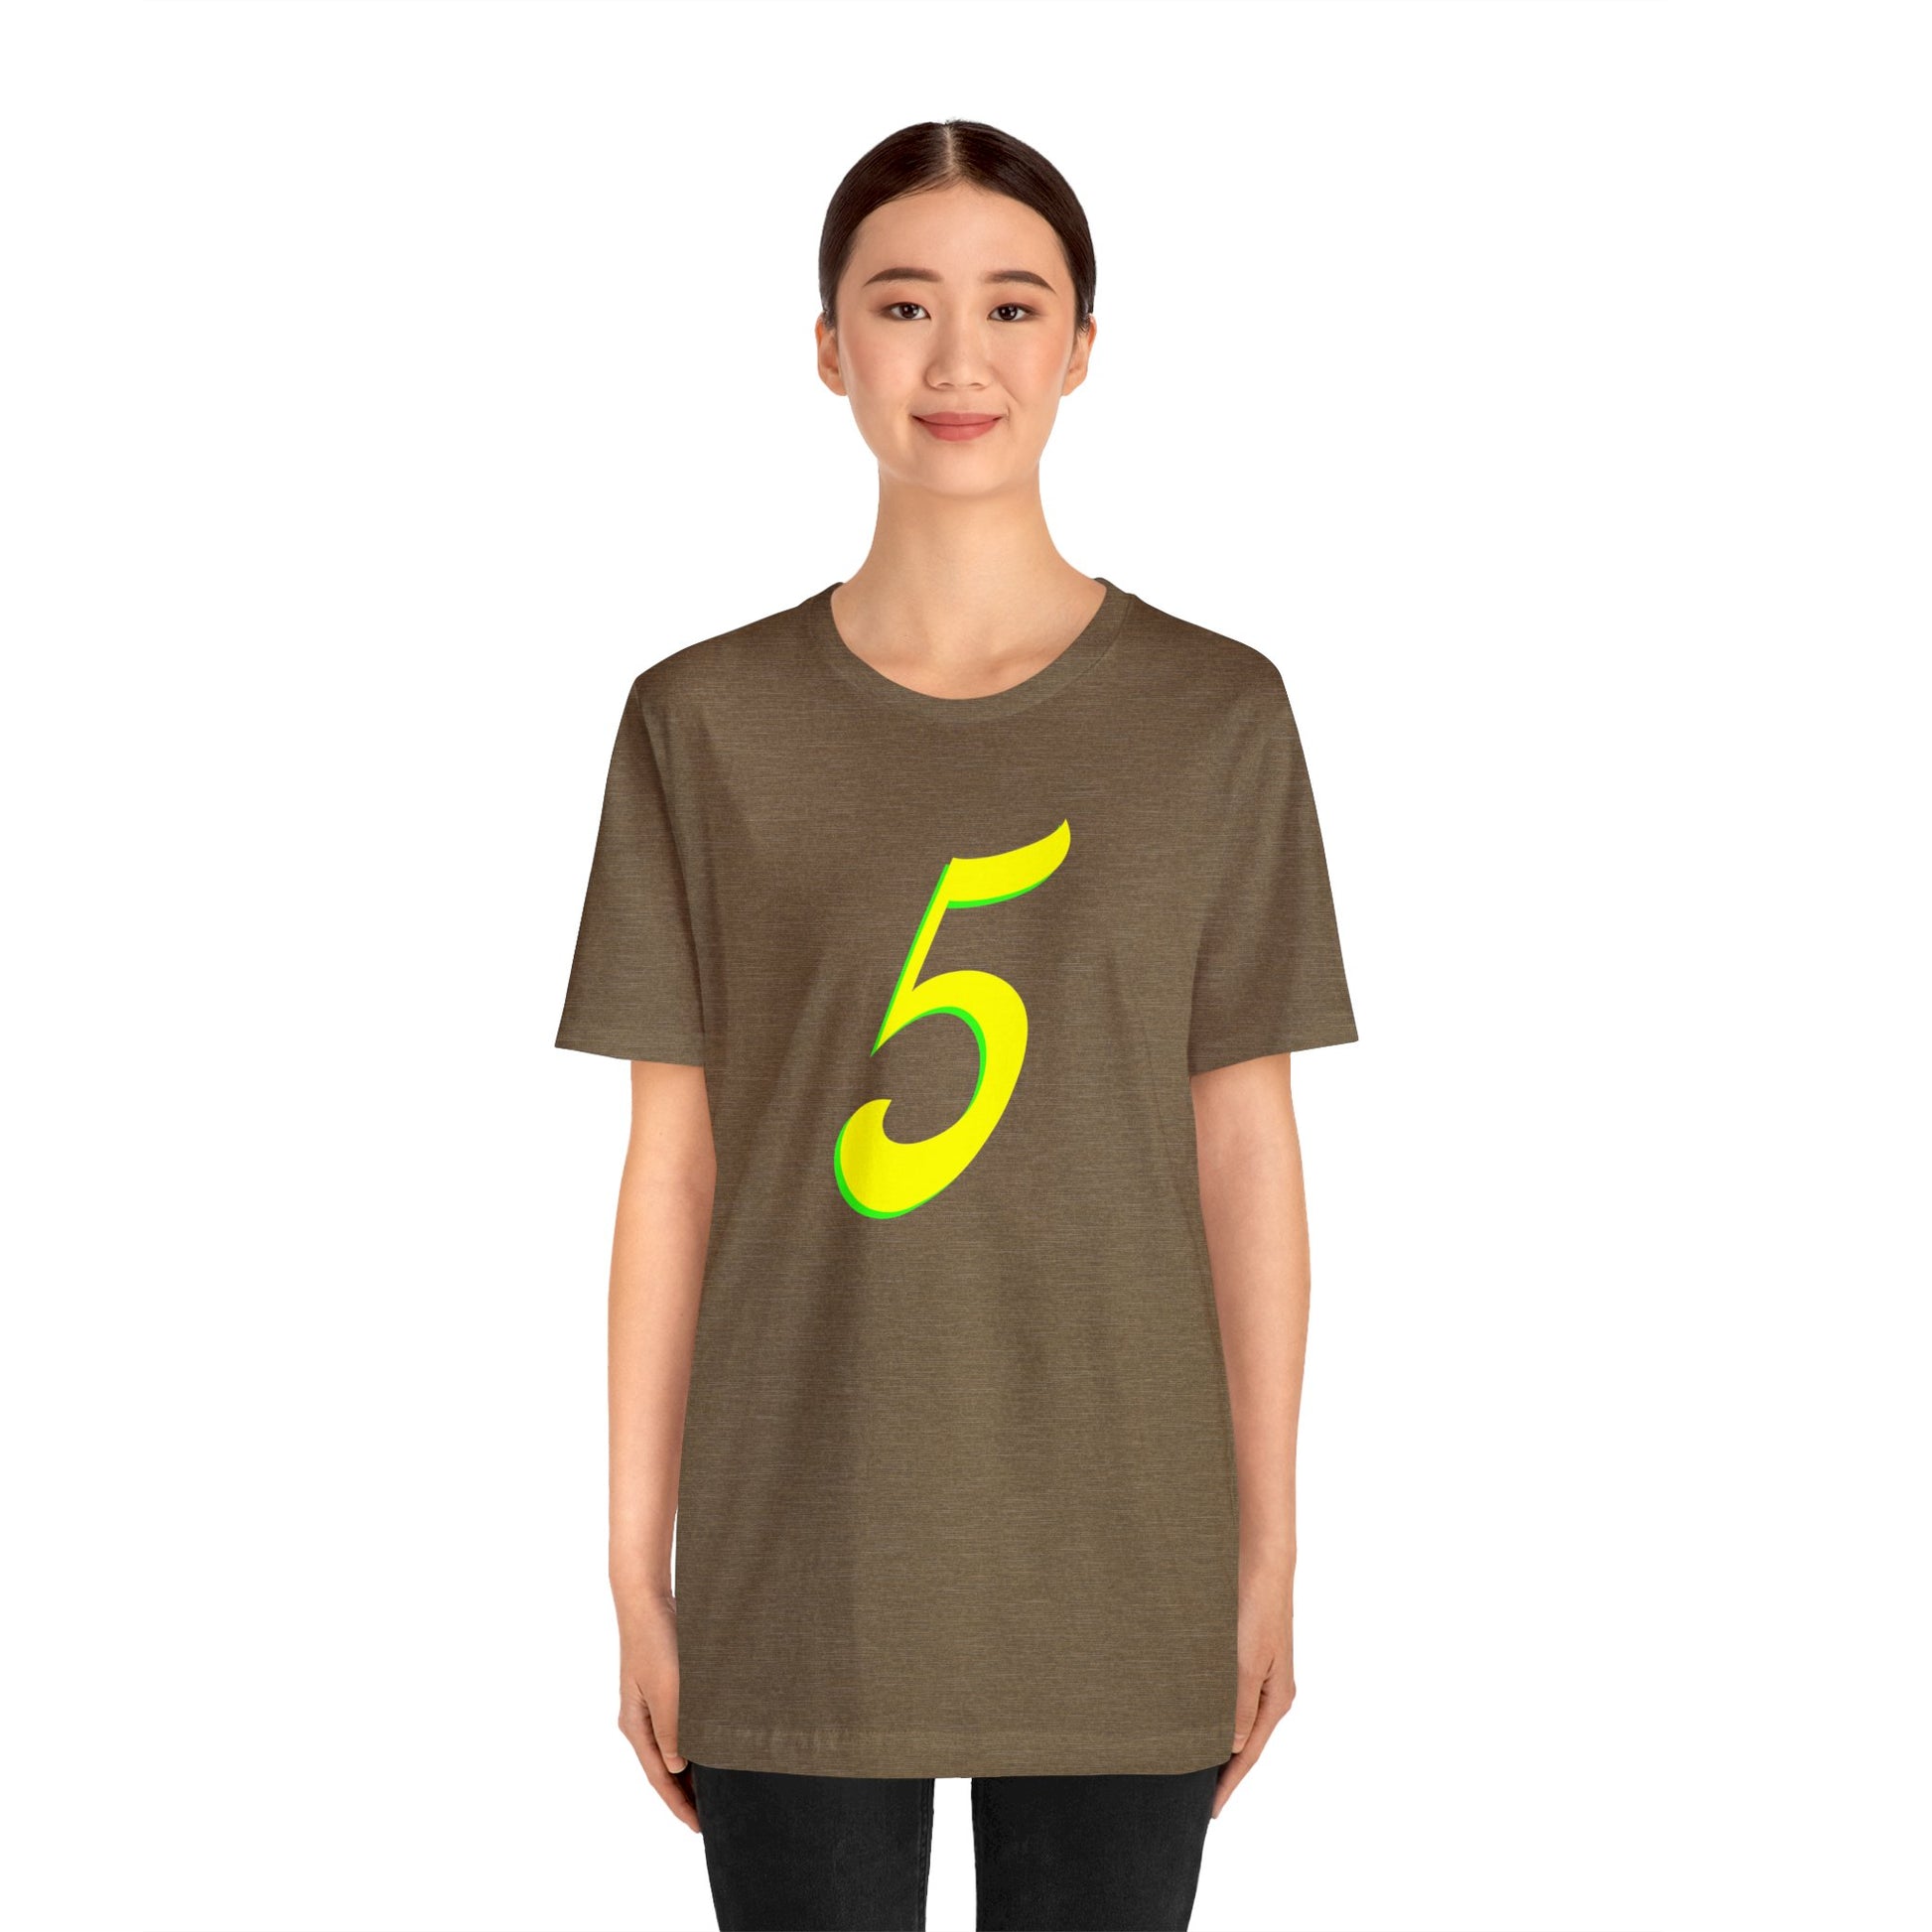 Number 5 Design - Soft Cotton Tee for birthdays and celebrations, Gift for friends and family, Multiple Options by clothezy.com in Dark Grey Heather Size Medium - Buy Now